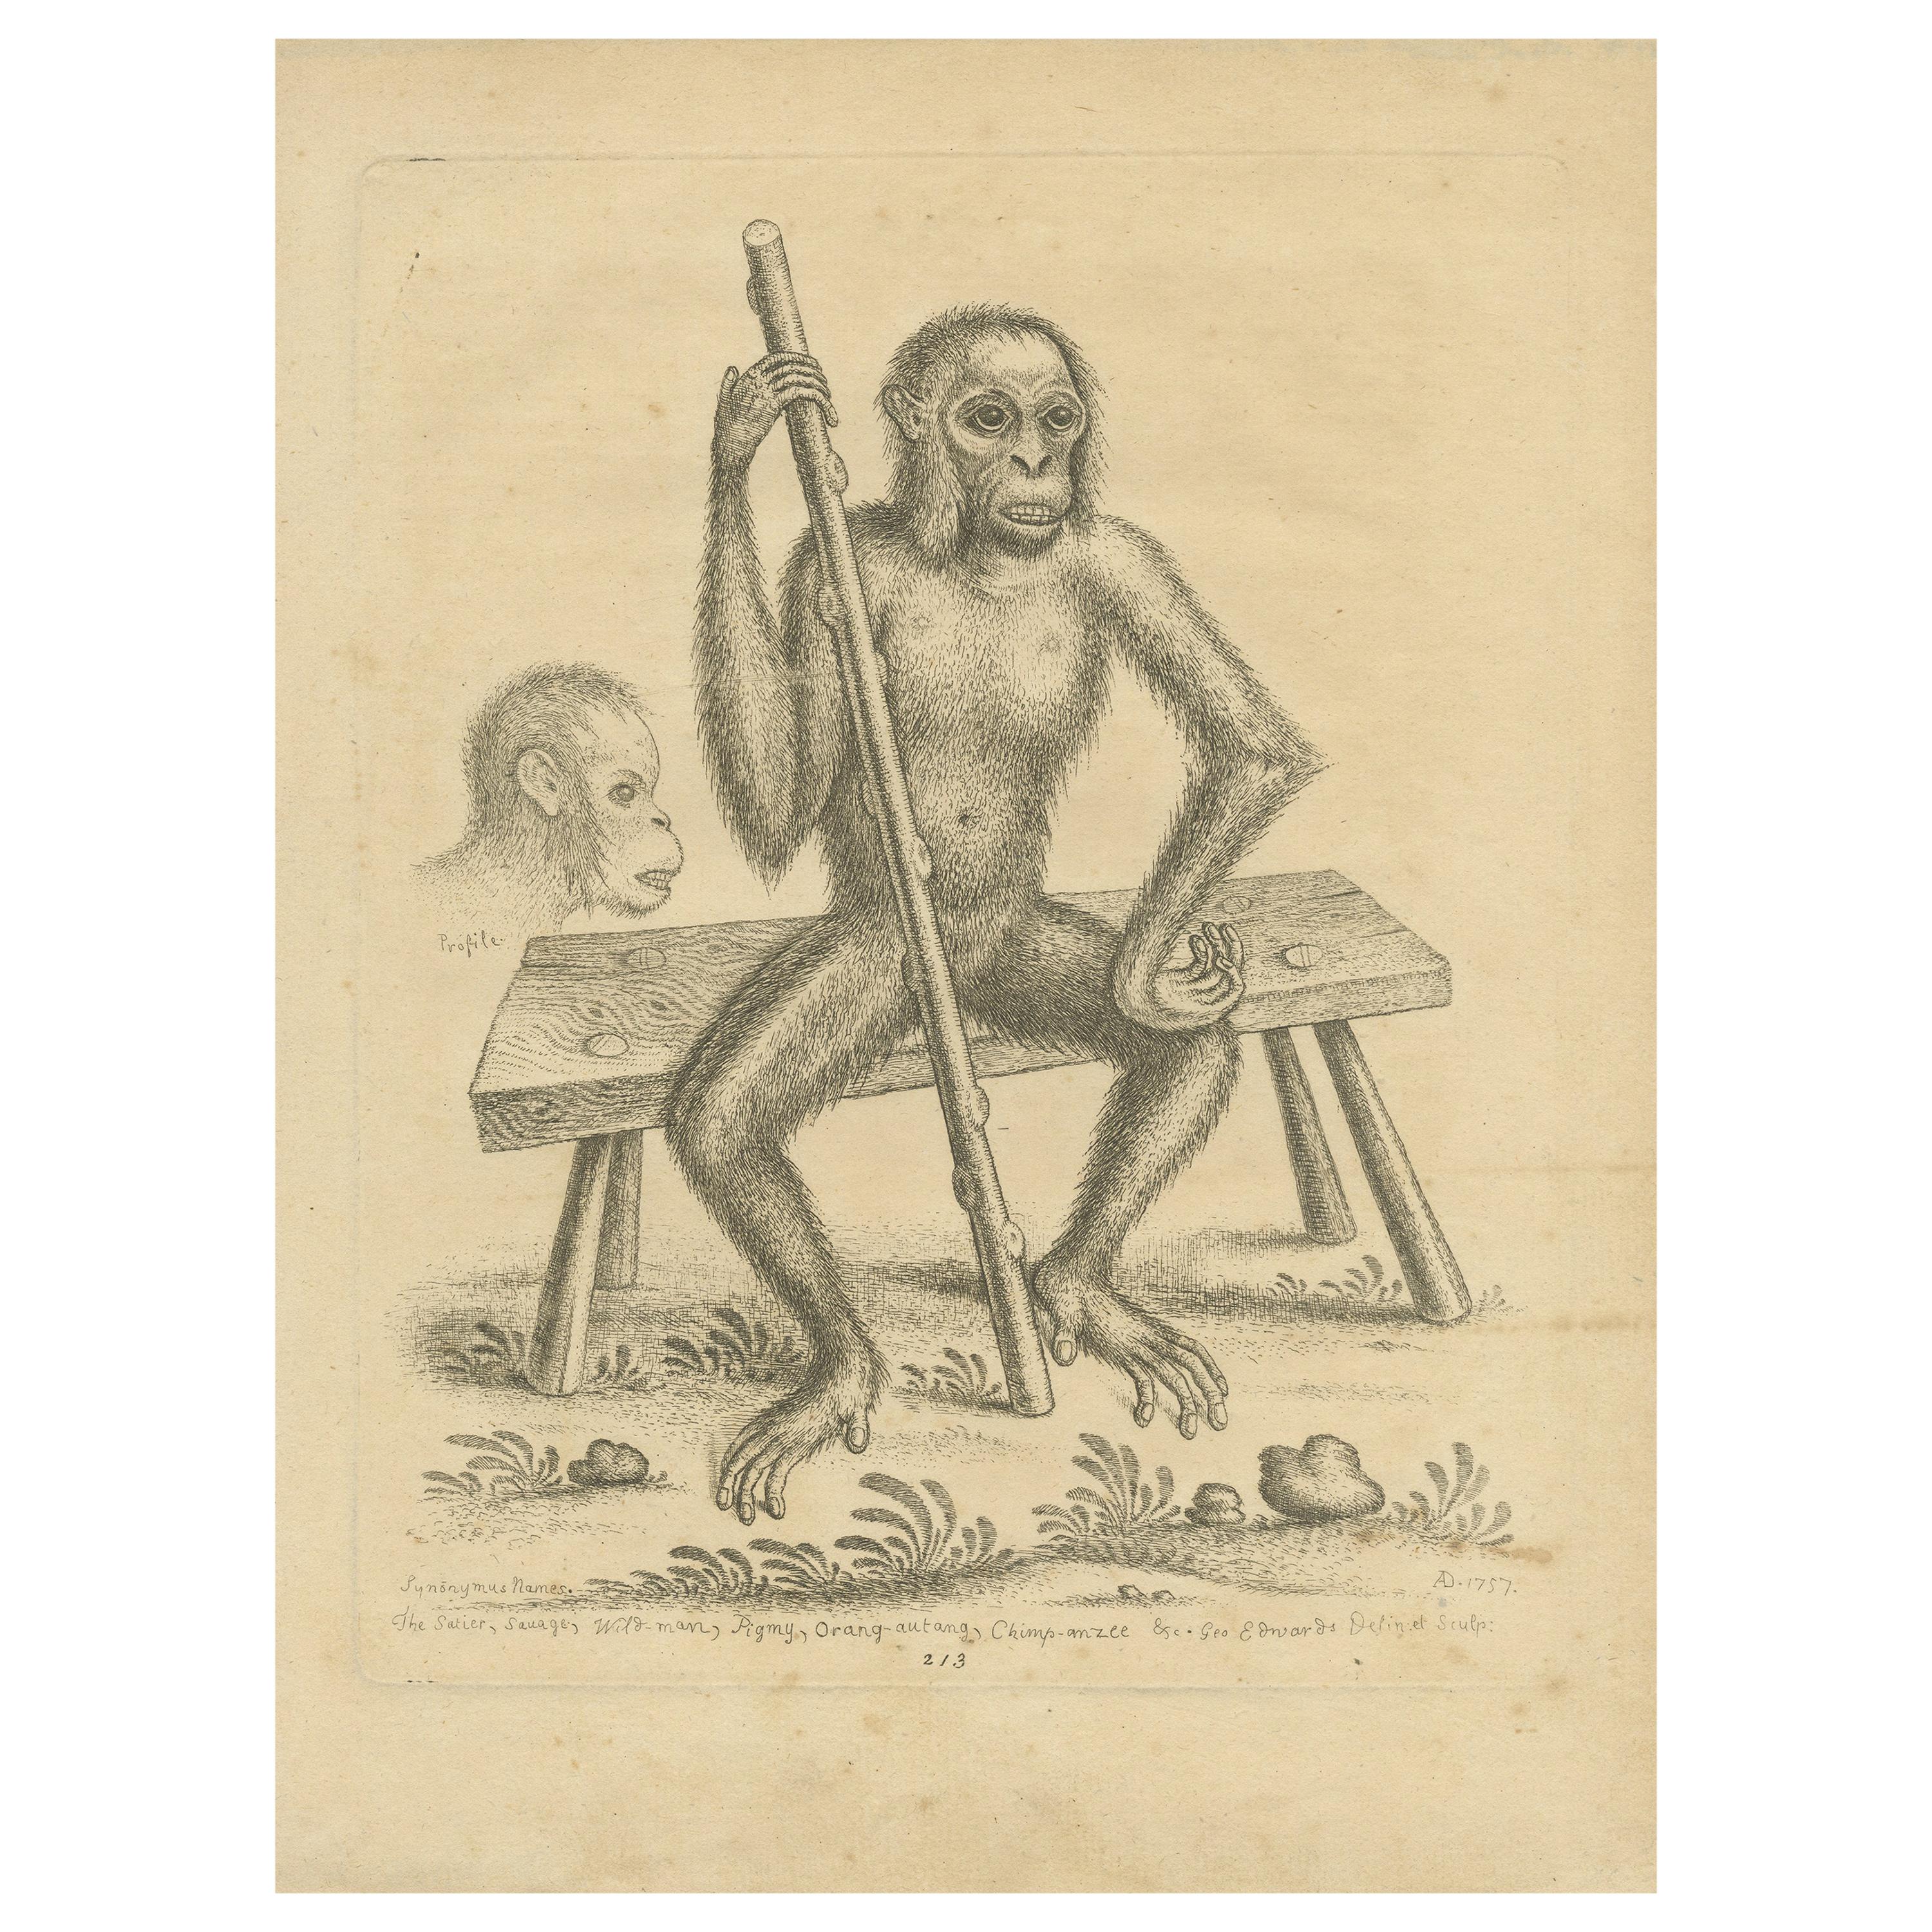 Antique Print of an Orangutan Seated on a Bench by Edwards, 1757